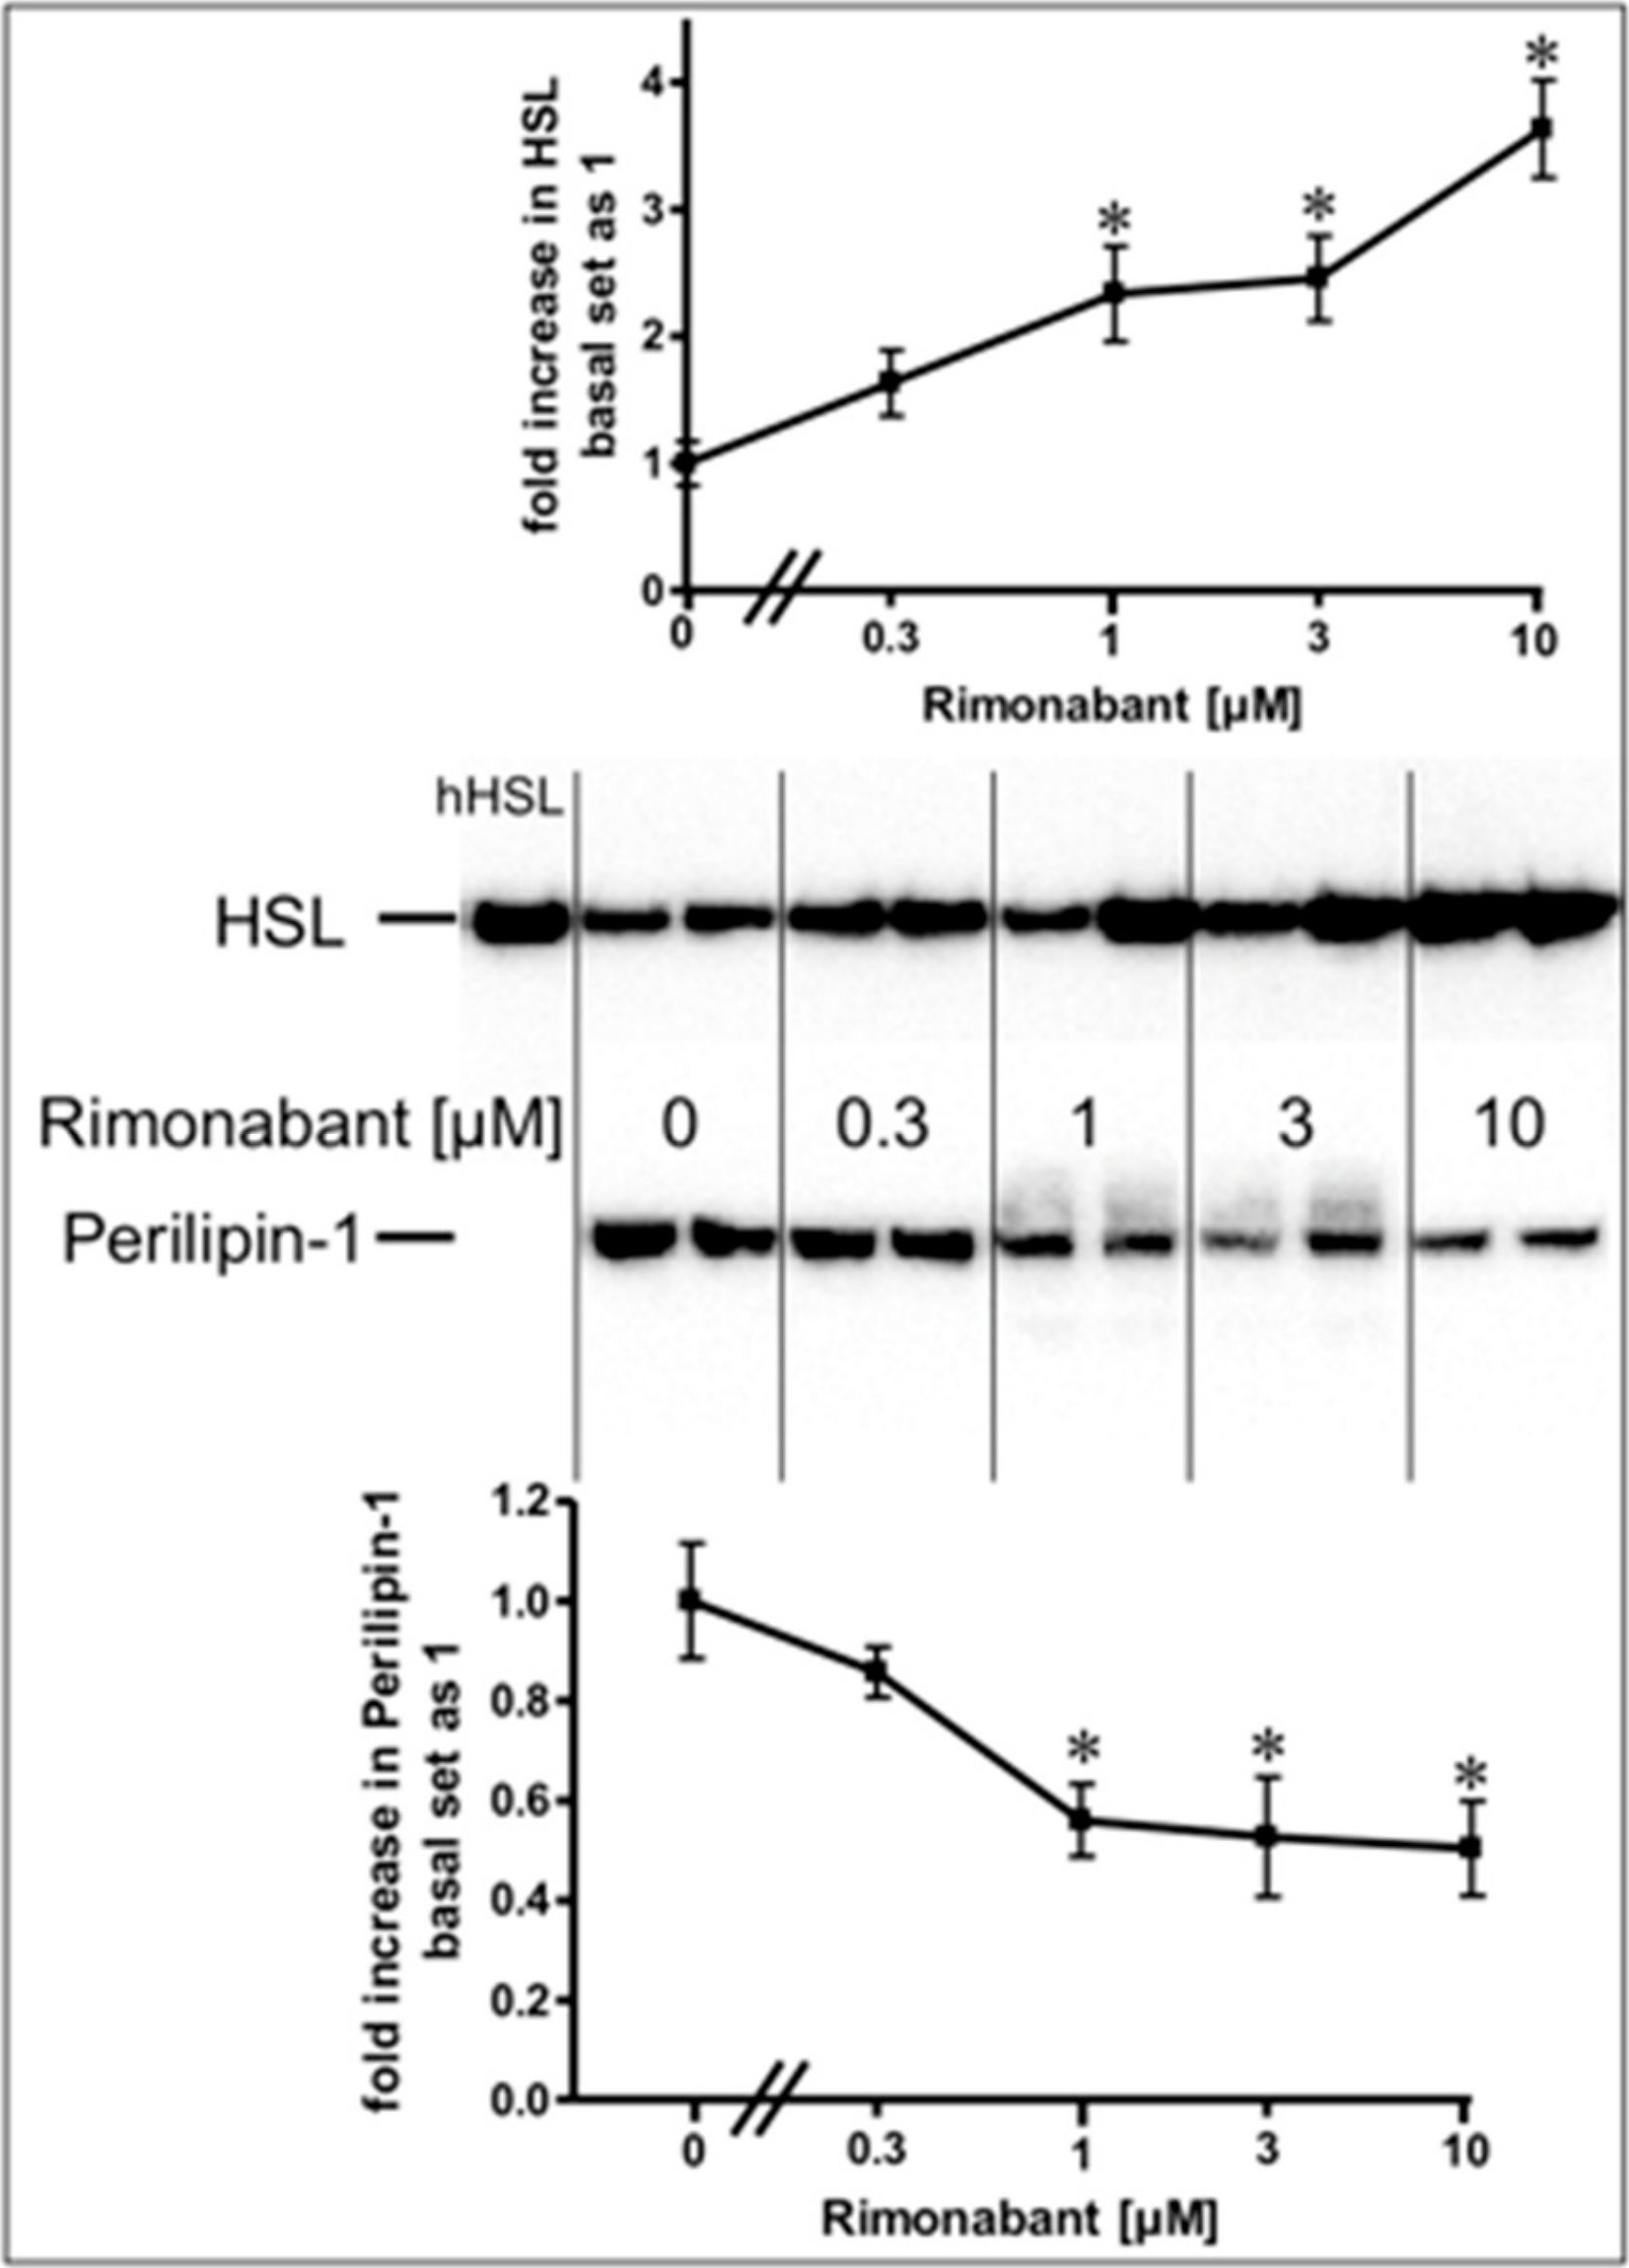 CB1 Receptor-Dependent and Independent Induction of Lipolysis in Primary Rat Adipocytes by the Inverse Agonist Rimonabant (SR141716A).